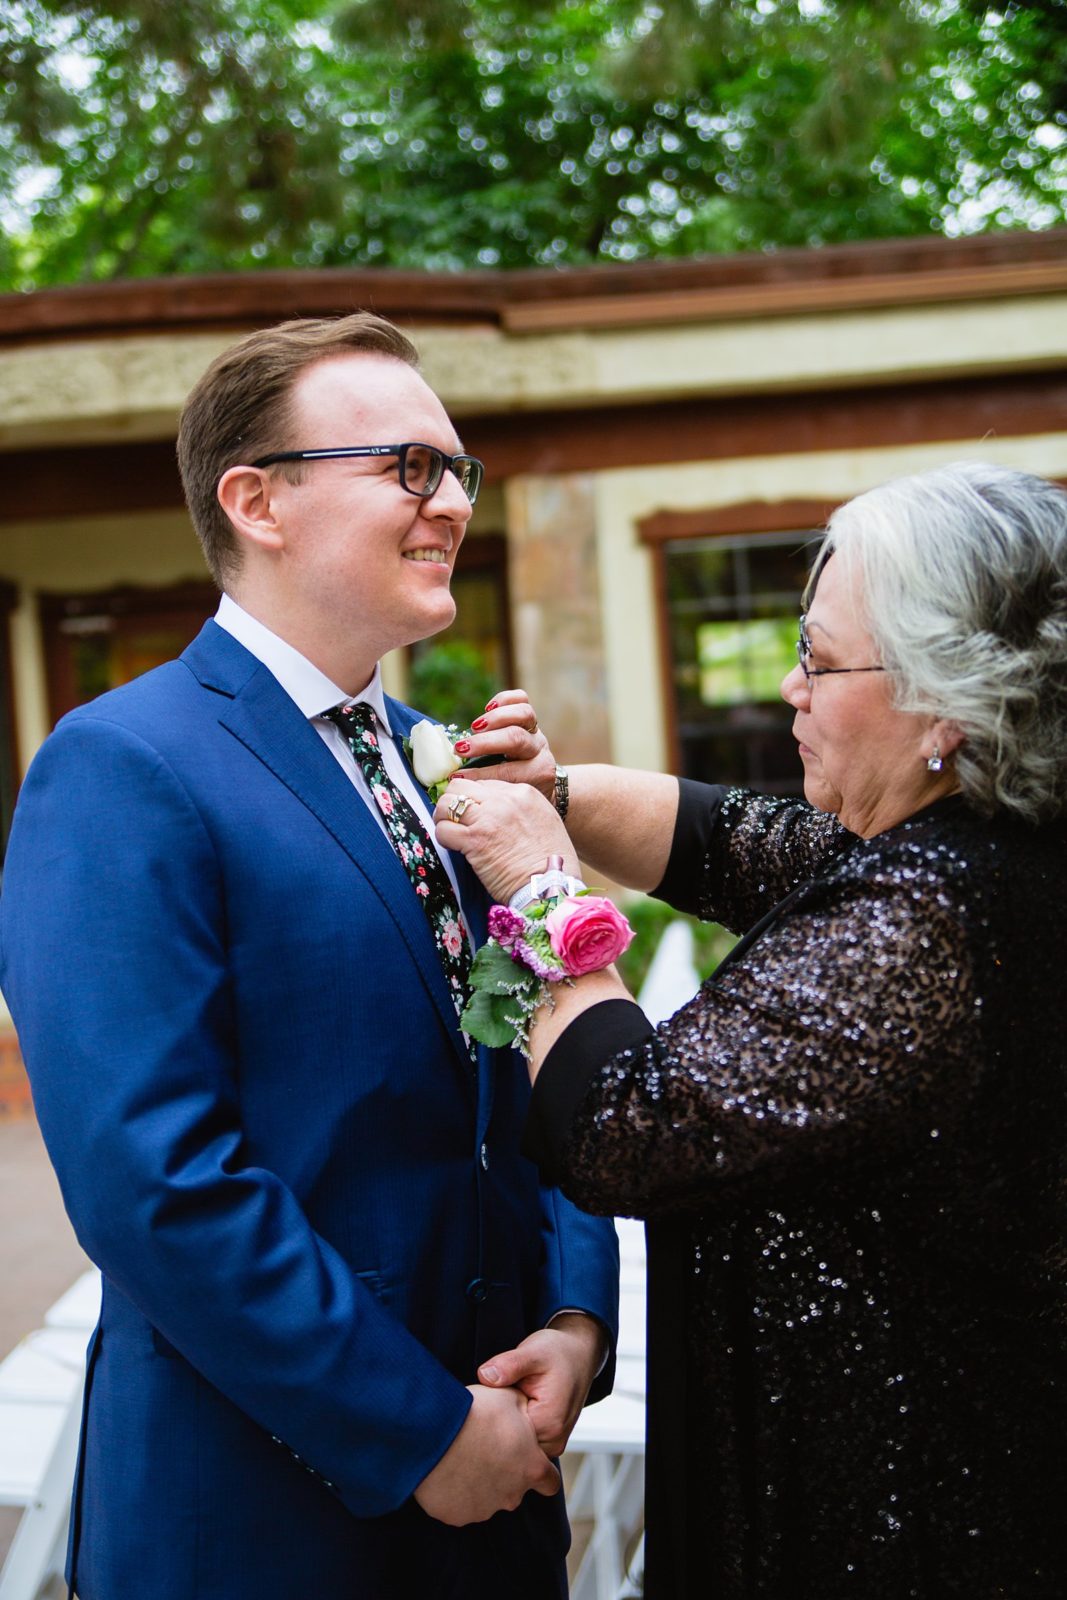 Groom's mother pinning on his boutonniere while getting ready for his wedding day by PMA Photography.